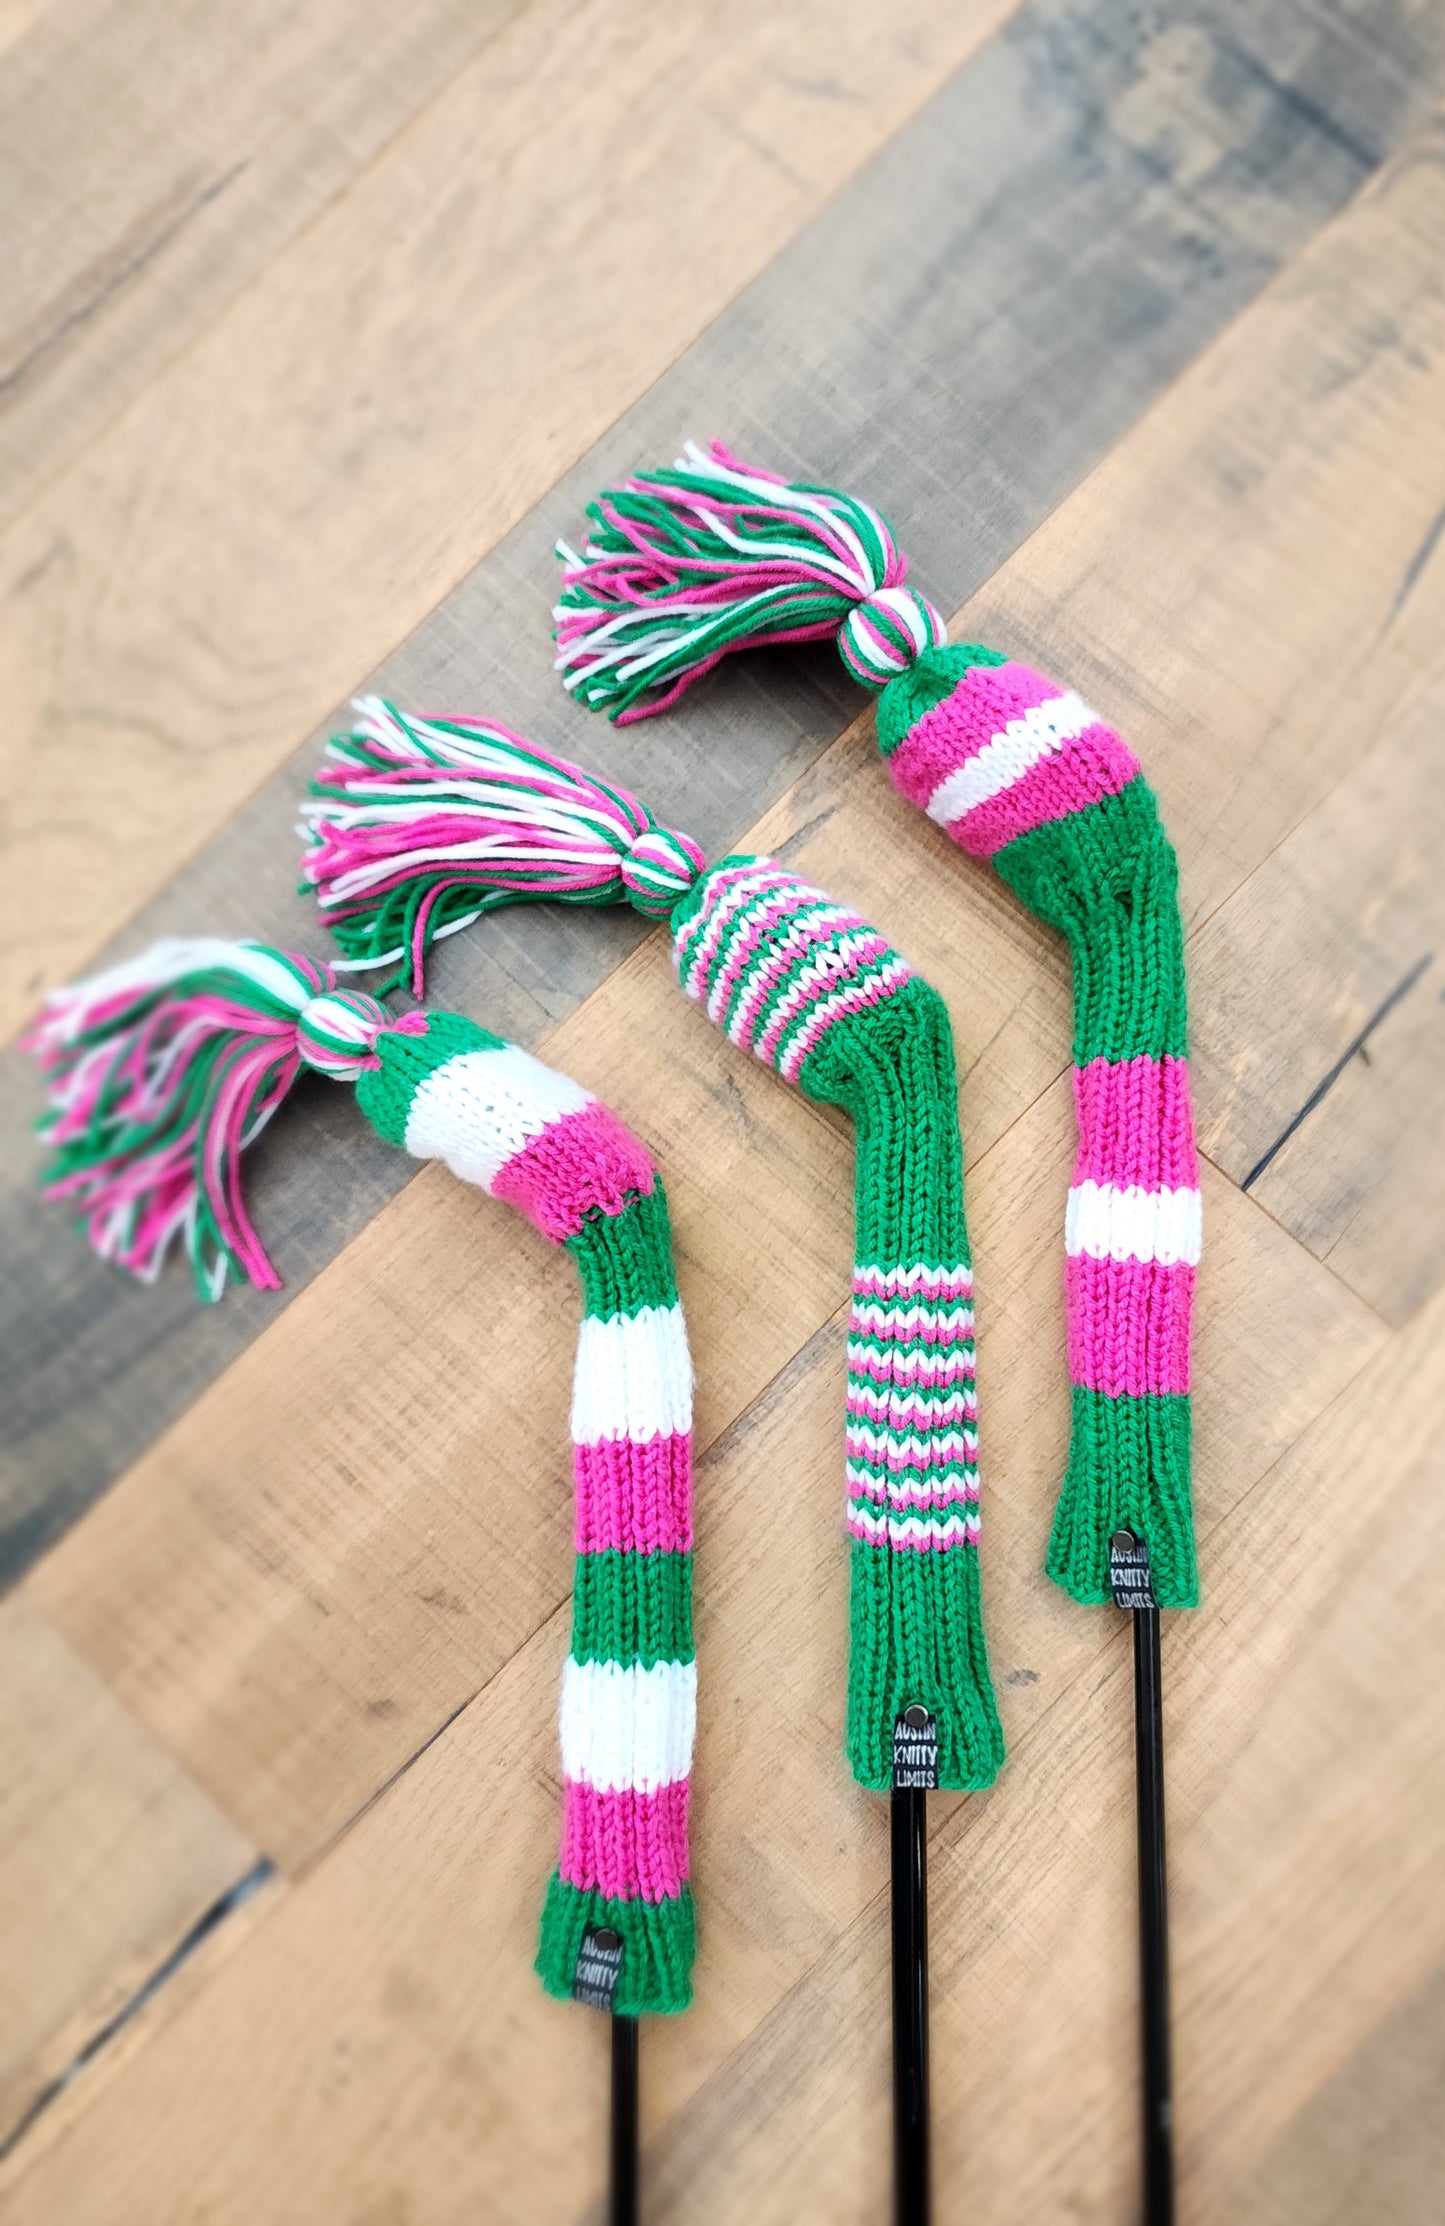 Three Hand Knit Golf Club Head Covers Retro-Vintage Pink, Green & White with Tassels for Drivers, Woods - Austinknittylimits